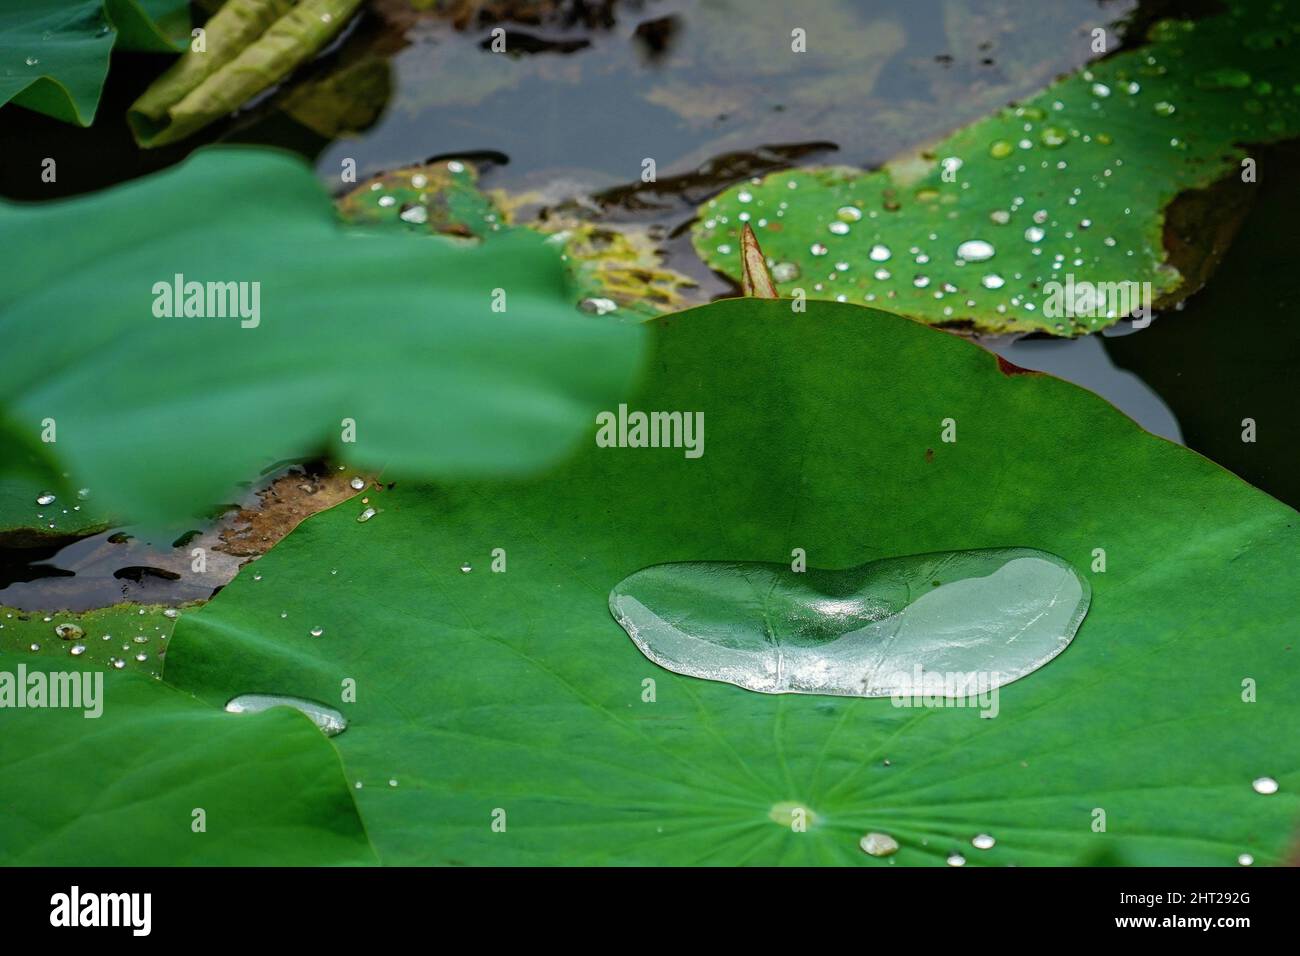 A closeup of water drops on the green lotus leaves on the surface of the pond Stock Photo